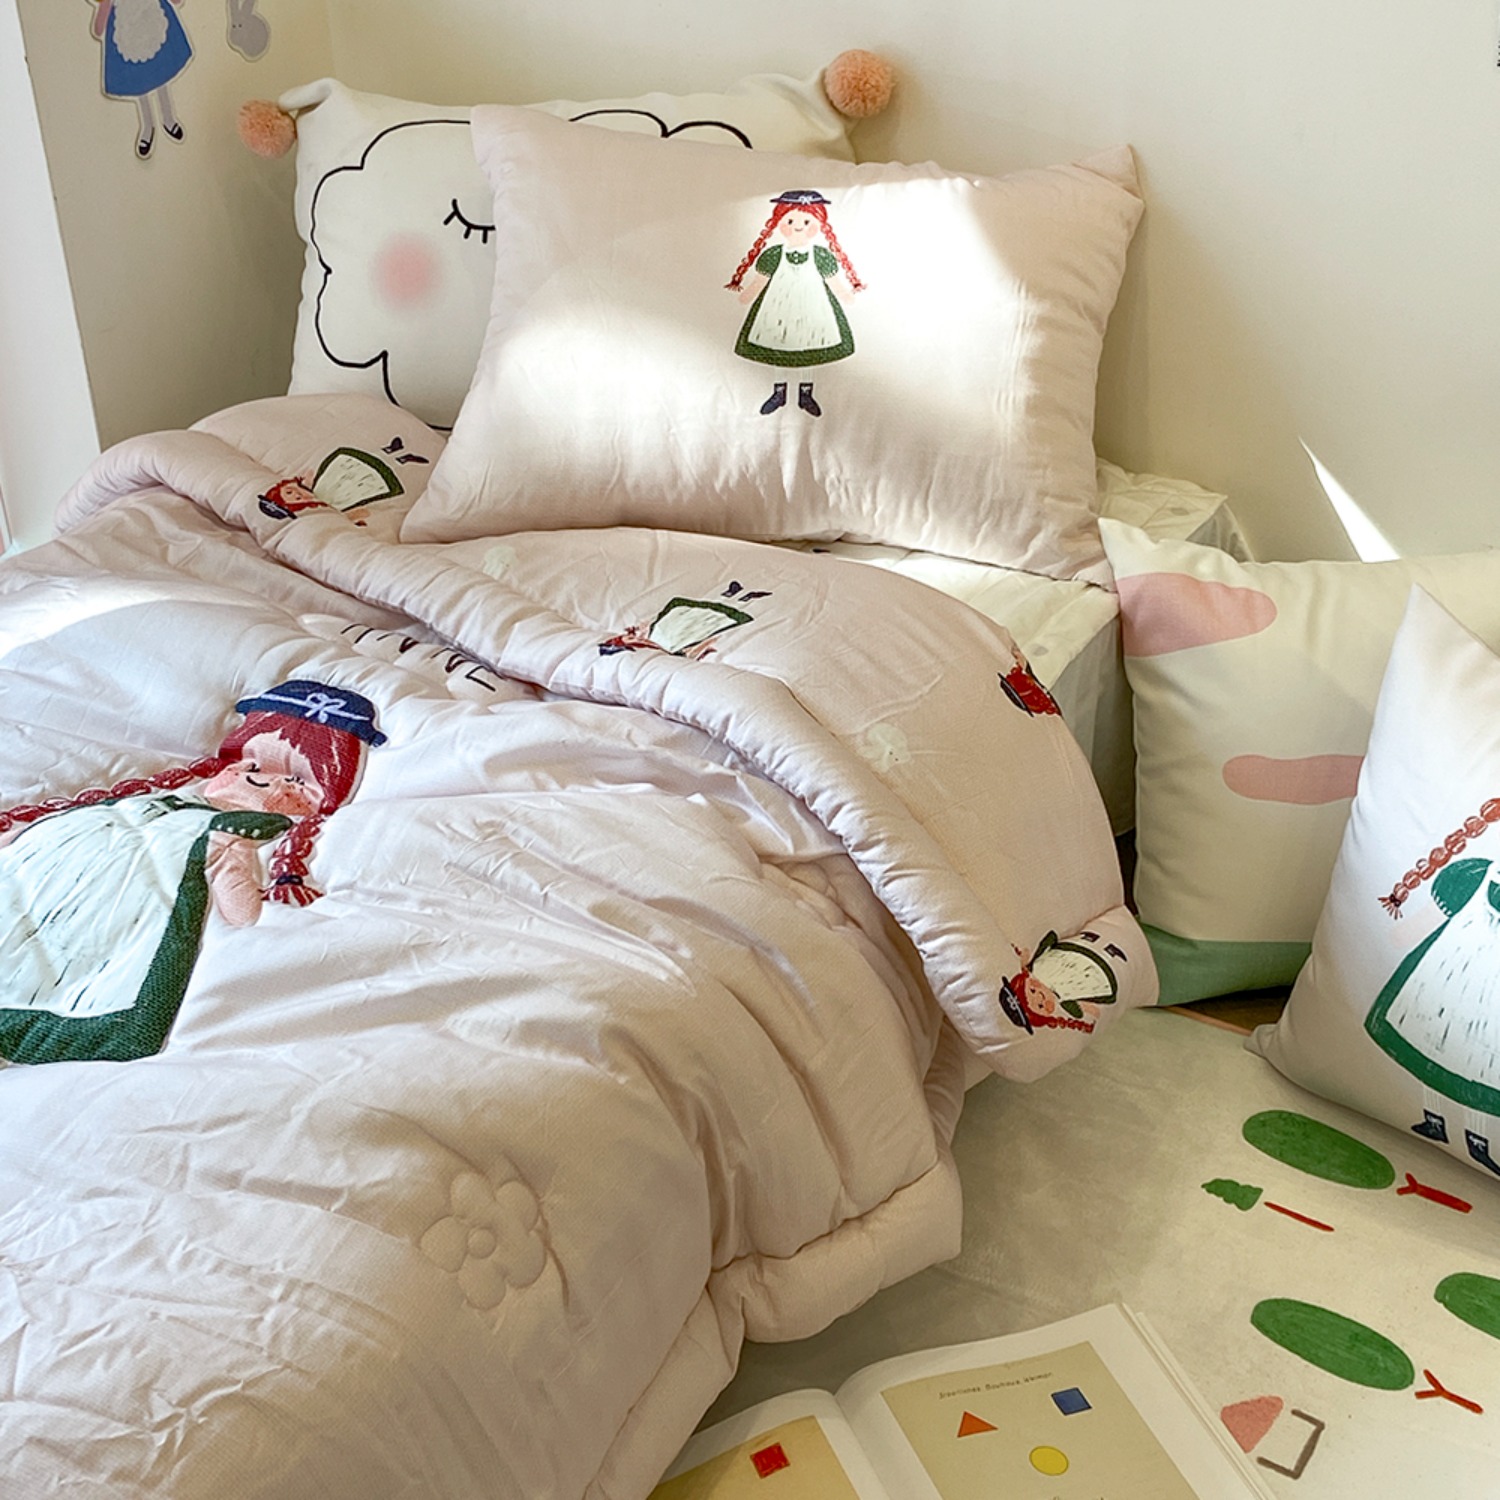 [drawing AMY] Anne Of Green Gables bed comforter set